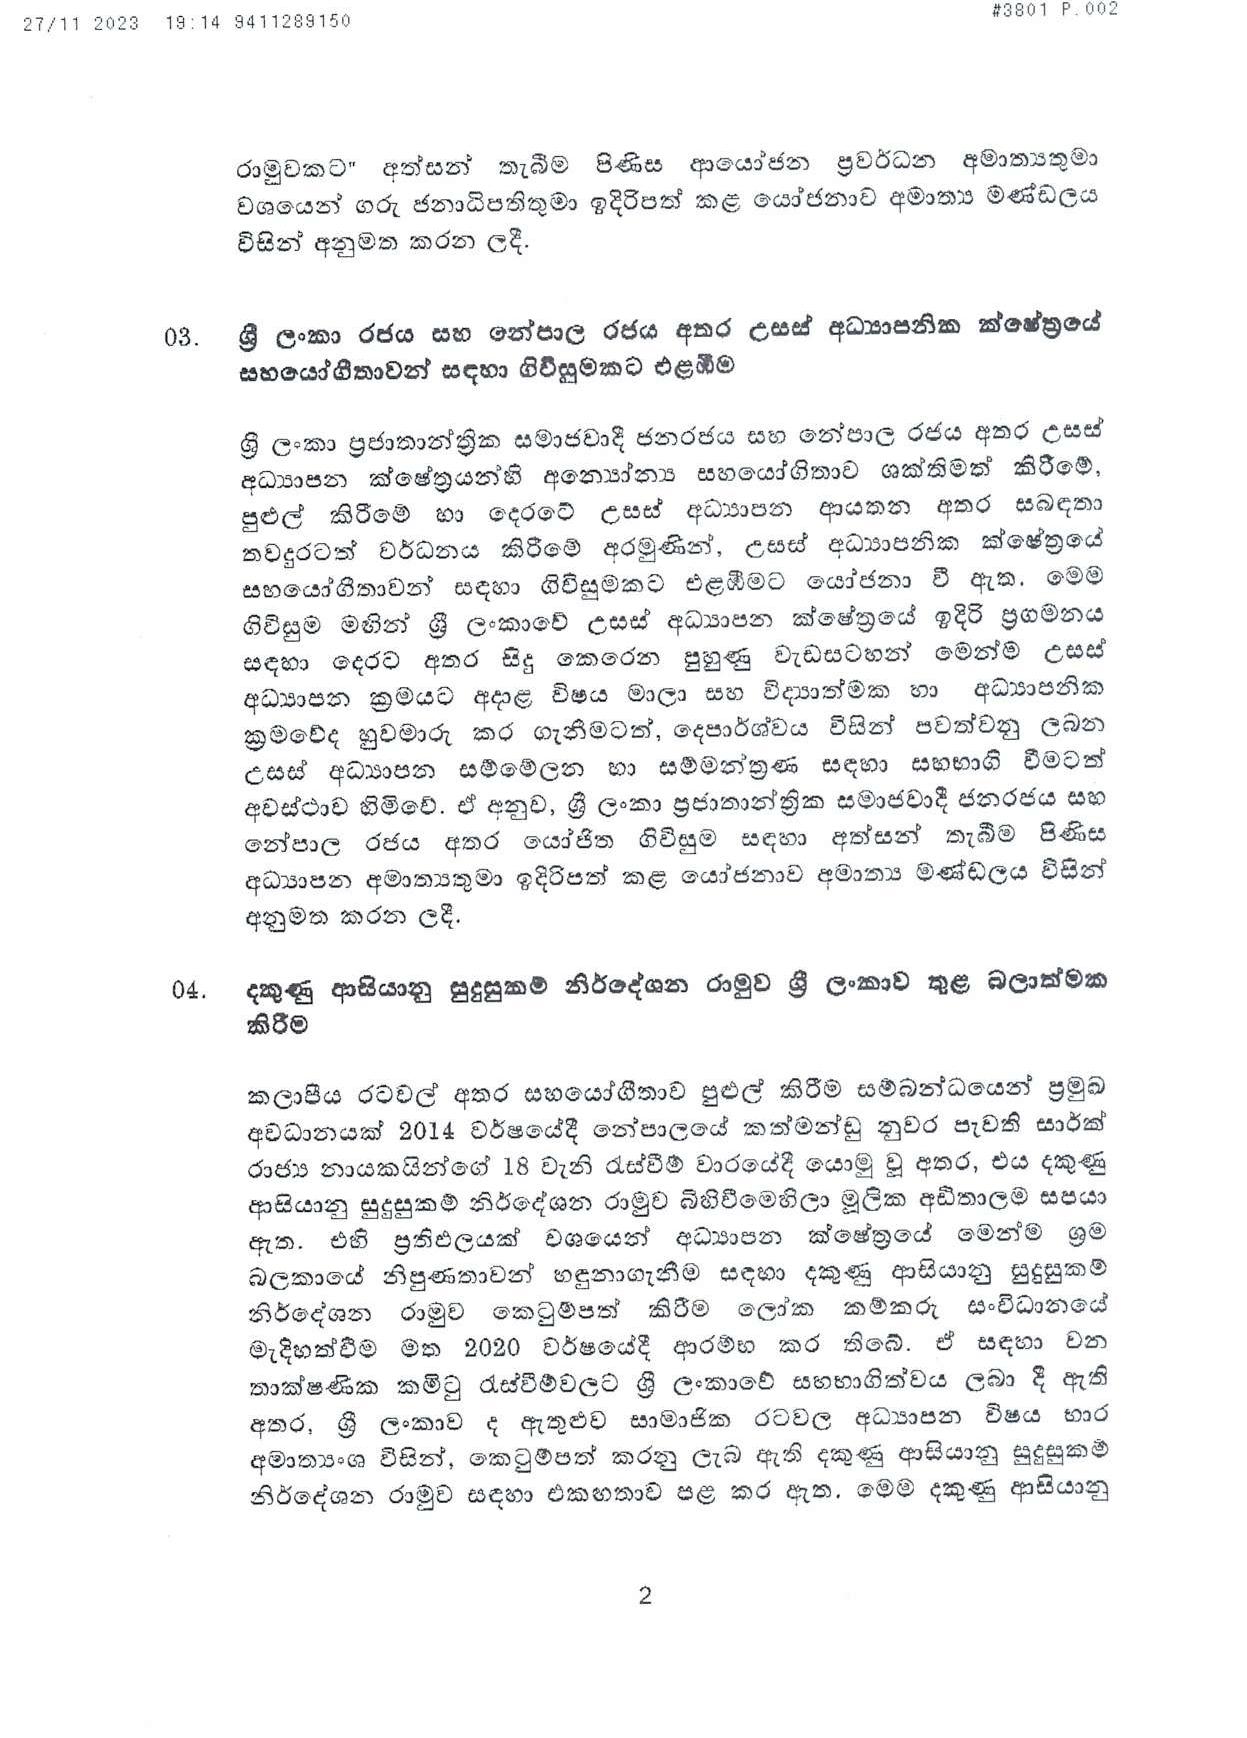 Cabinet Decision on 27.11.2023 page 002